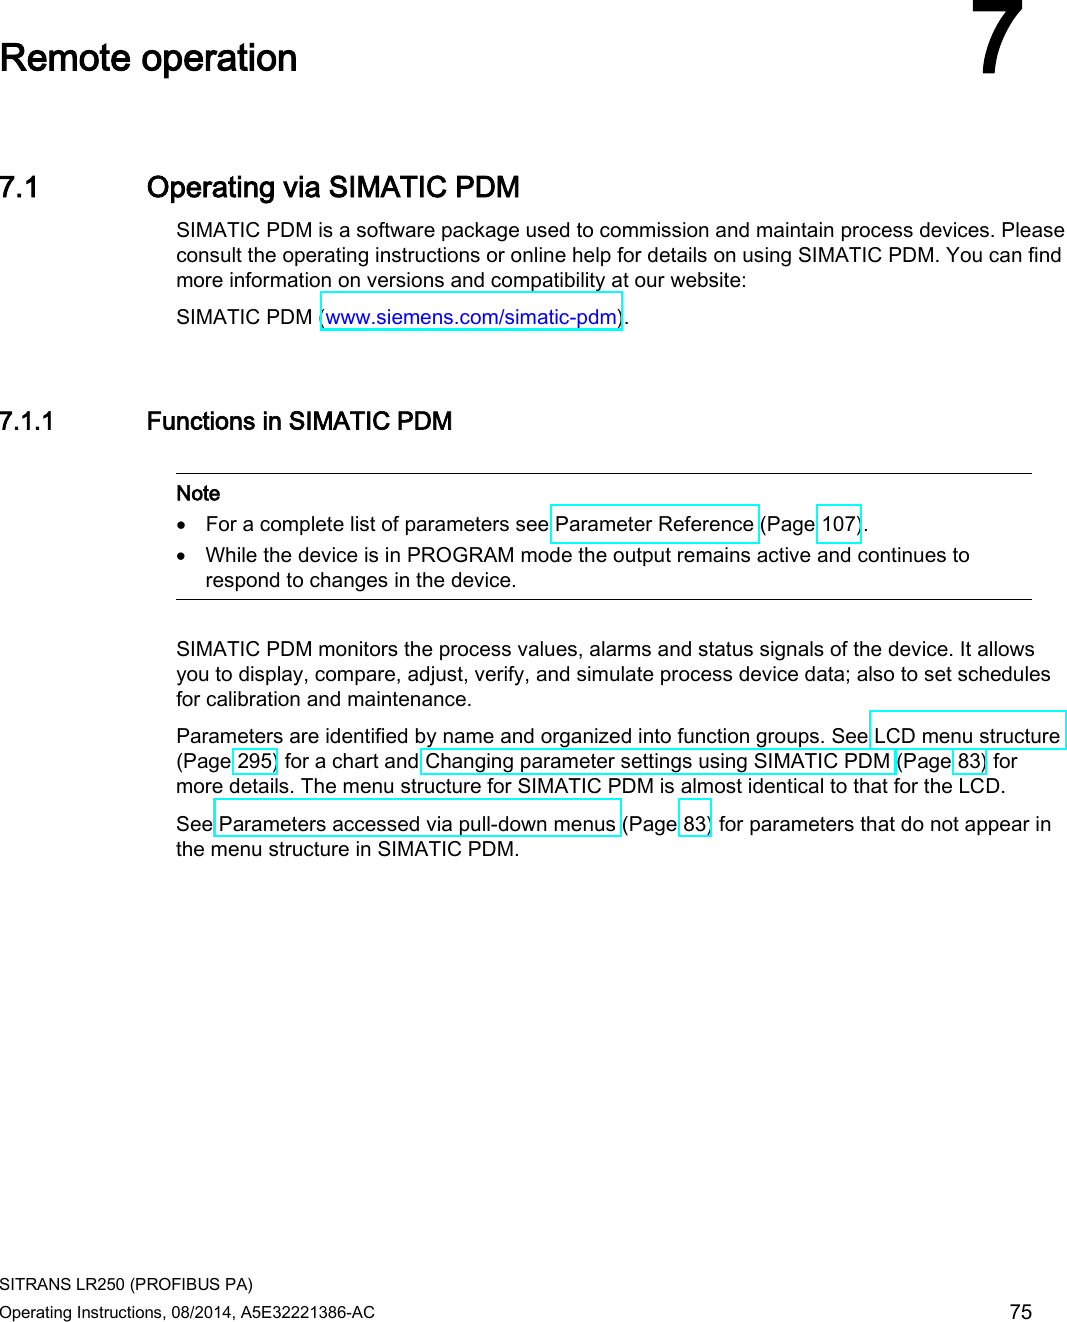  SITRANS LR250 (PROFIBUS PA) Operating Instructions, 08/2014, A5E32221386-AC 75  Remote operation 7 7.1 Operating via SIMATIC PDM SIMATIC PDM is a software package used to commission and maintain process devices. Please consult the operating instructions or online help for details on using SIMATIC PDM. You can find more information on versions and compatibility at our website: SIMATIC PDM (www.siemens.com/simatic-pdm). 7.1.1 Functions in SIMATIC PDM   Note • For a complete list of parameters see Parameter Reference (Page 107). • While the device is in PROGRAM mode the output remains active and continues to respond to changes in the device.  SIMATIC PDM monitors the process values, alarms and status signals of the device. It allows you to display, compare, adjust, verify, and simulate process device data; also to set schedules for calibration and maintenance. Parameters are identified by name and organized into function groups. See LCD menu structure (Page 295) for a chart and Changing parameter settings using SIMATIC PDM (Page 83) for more details. The menu structure for SIMATIC PDM is almost identical to that for the LCD. See Parameters accessed via pull-down menus (Page 83) for parameters that do not appear in the menu structure in SIMATIC PDM.  